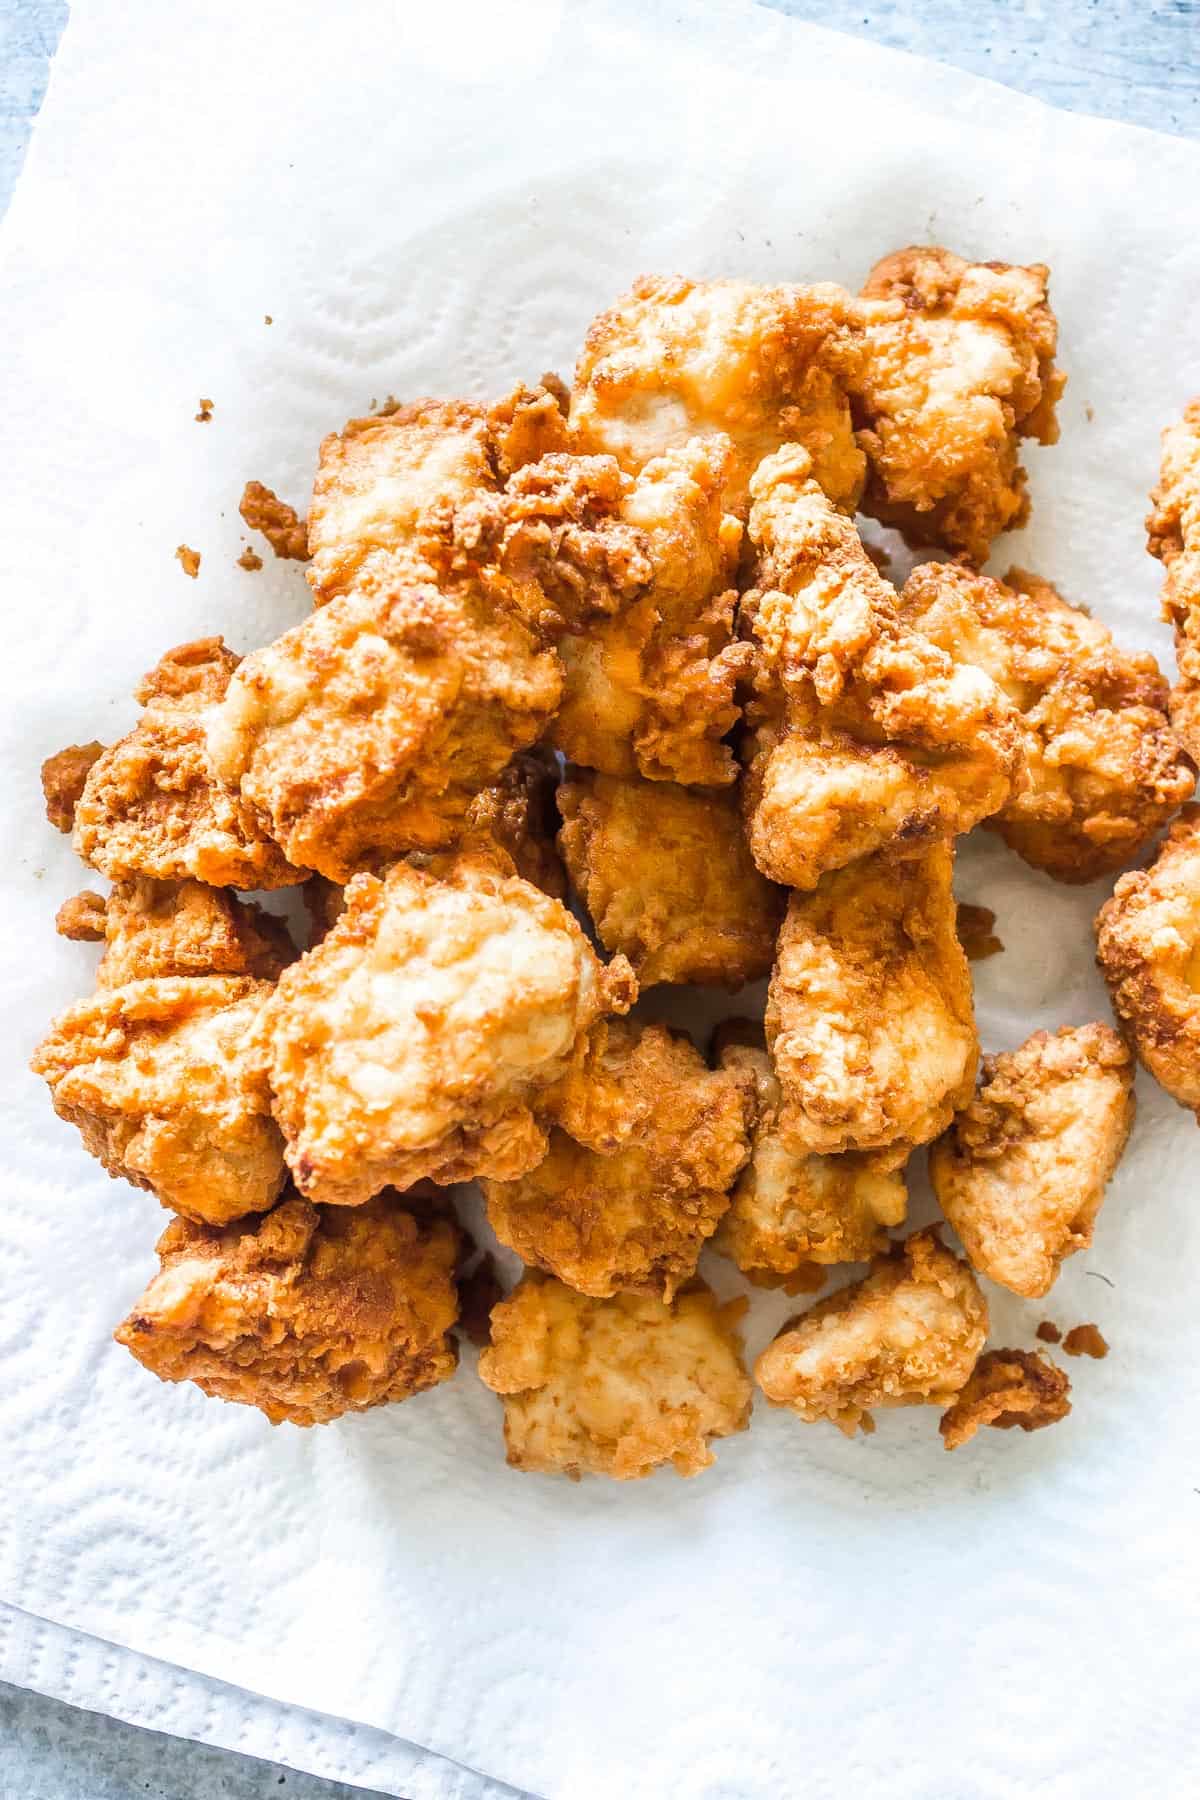 Fried Chicken Fresh from the skillet before being mixed with vegetables or sauce.